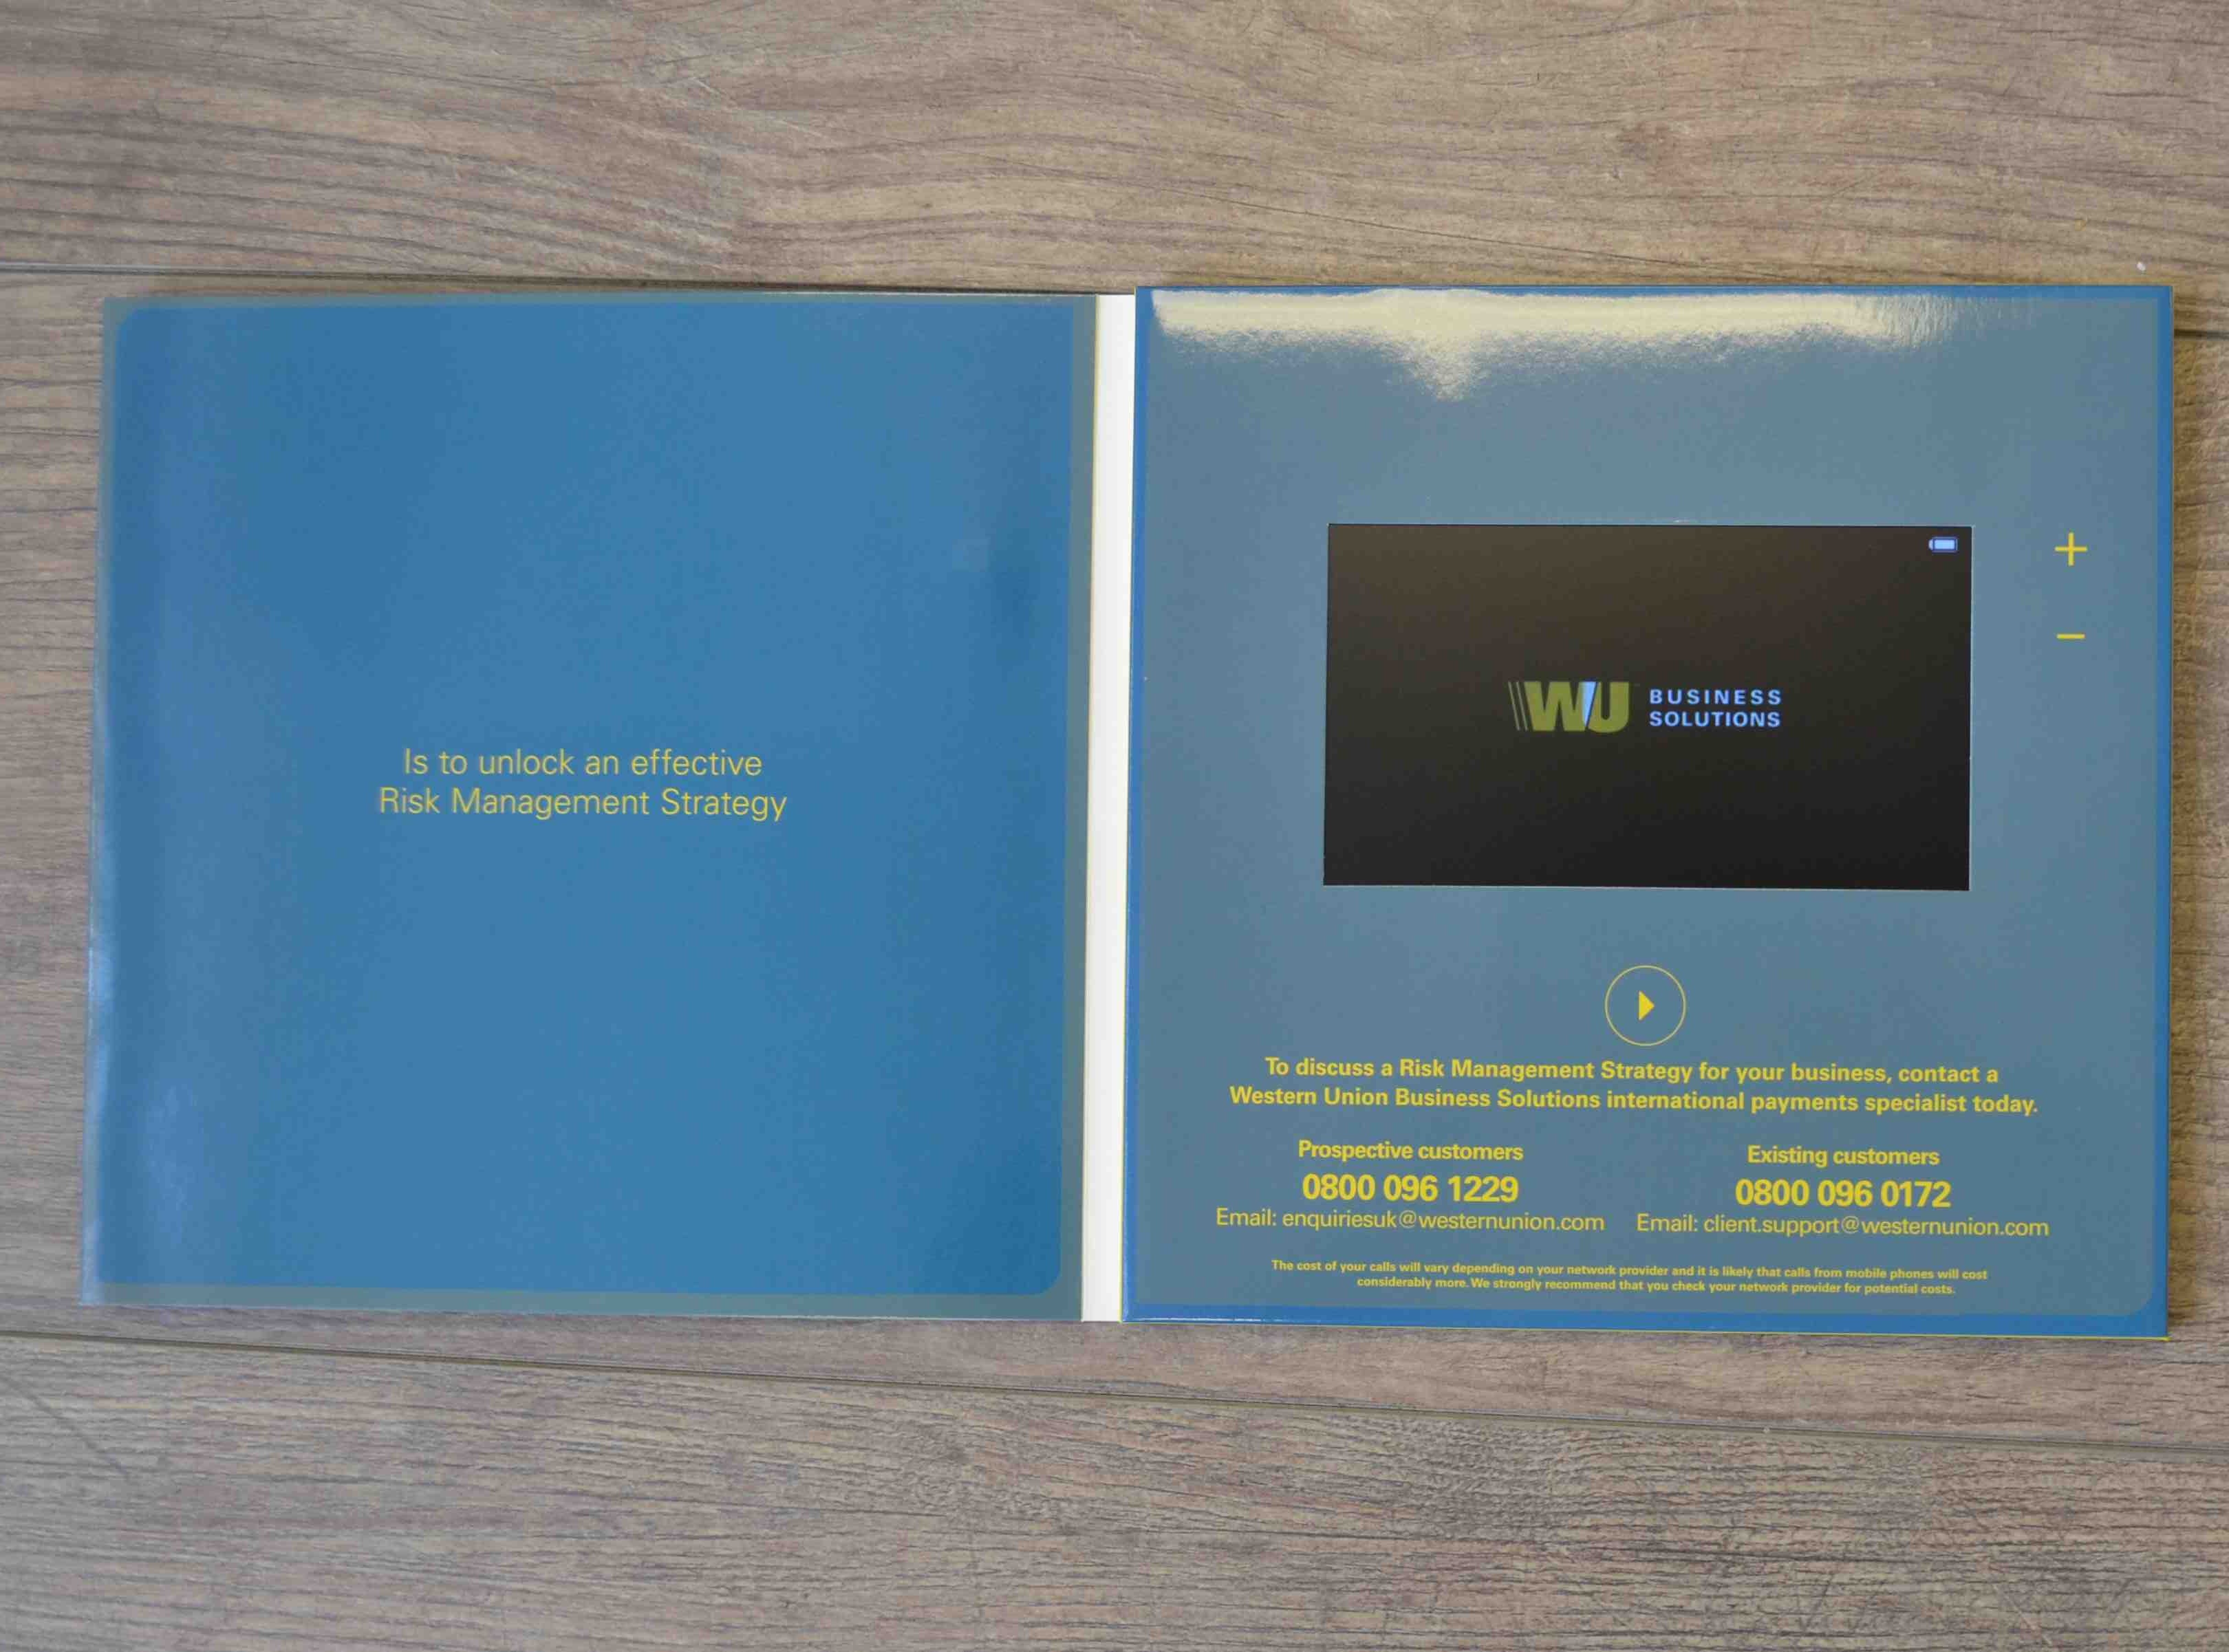 Video Brochure for Western Union